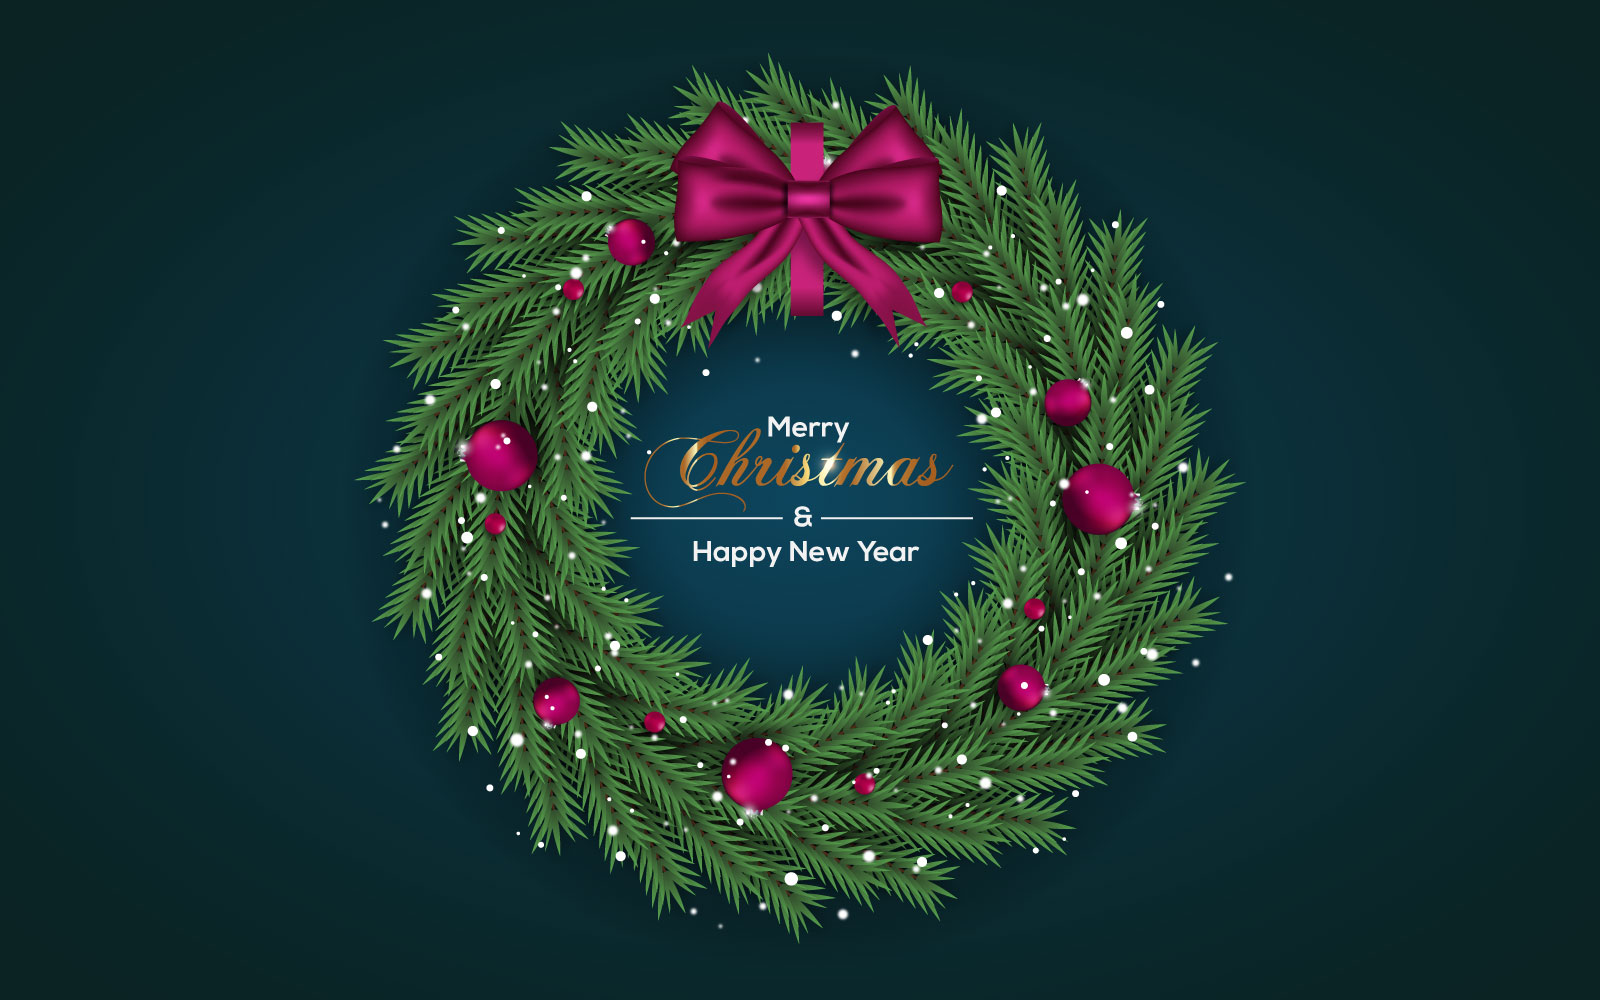 Christmas wreath vector design merry christmas text with garland elements for xmas greeting